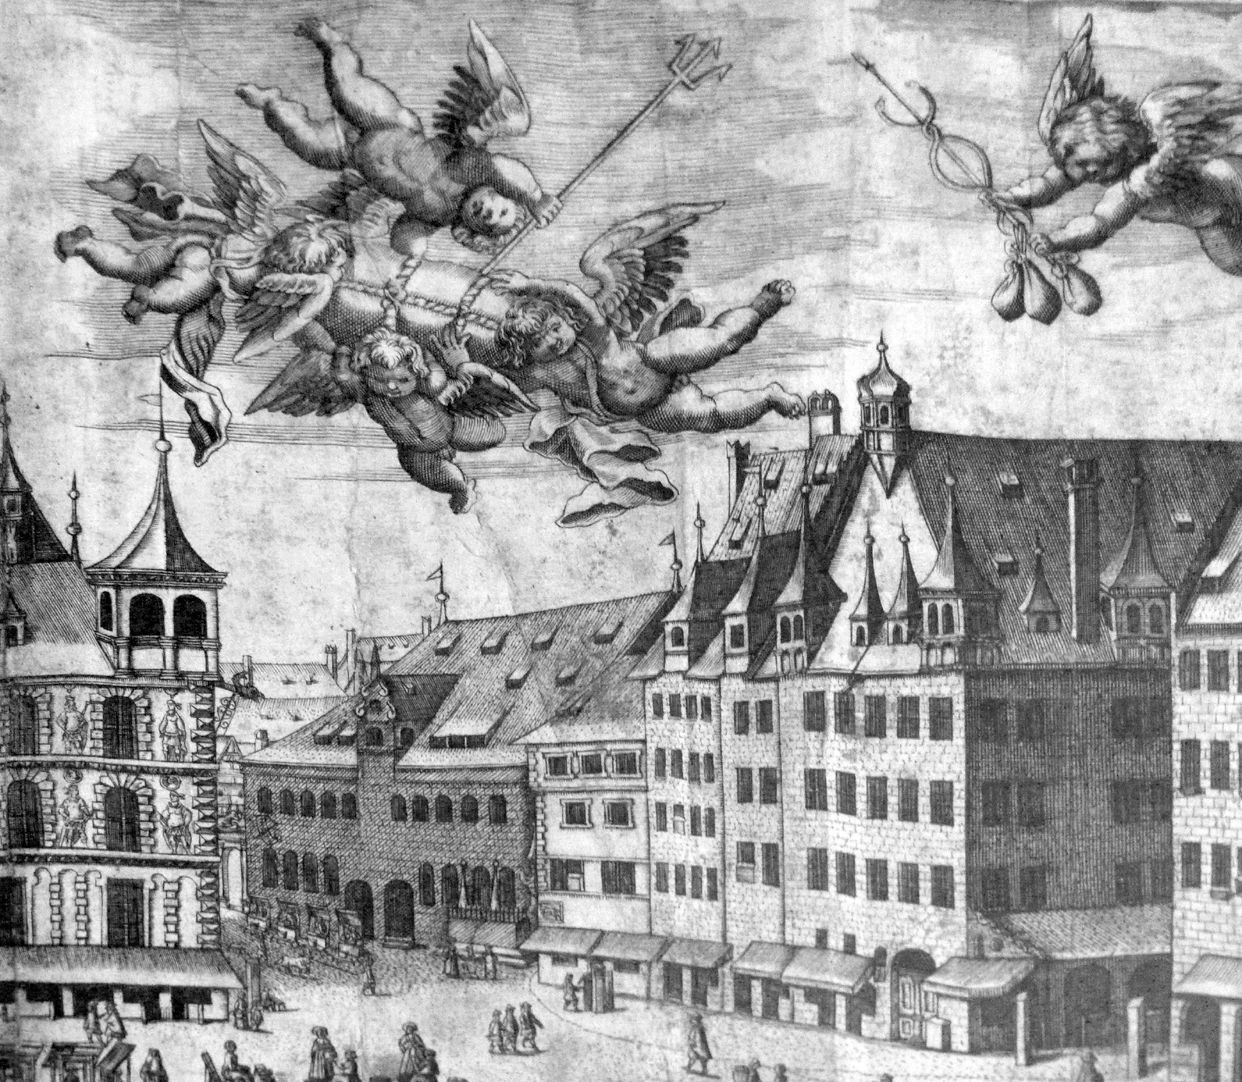 Real image of the market of the Imperial City of Nuremberg in detail South west market corner and butchery